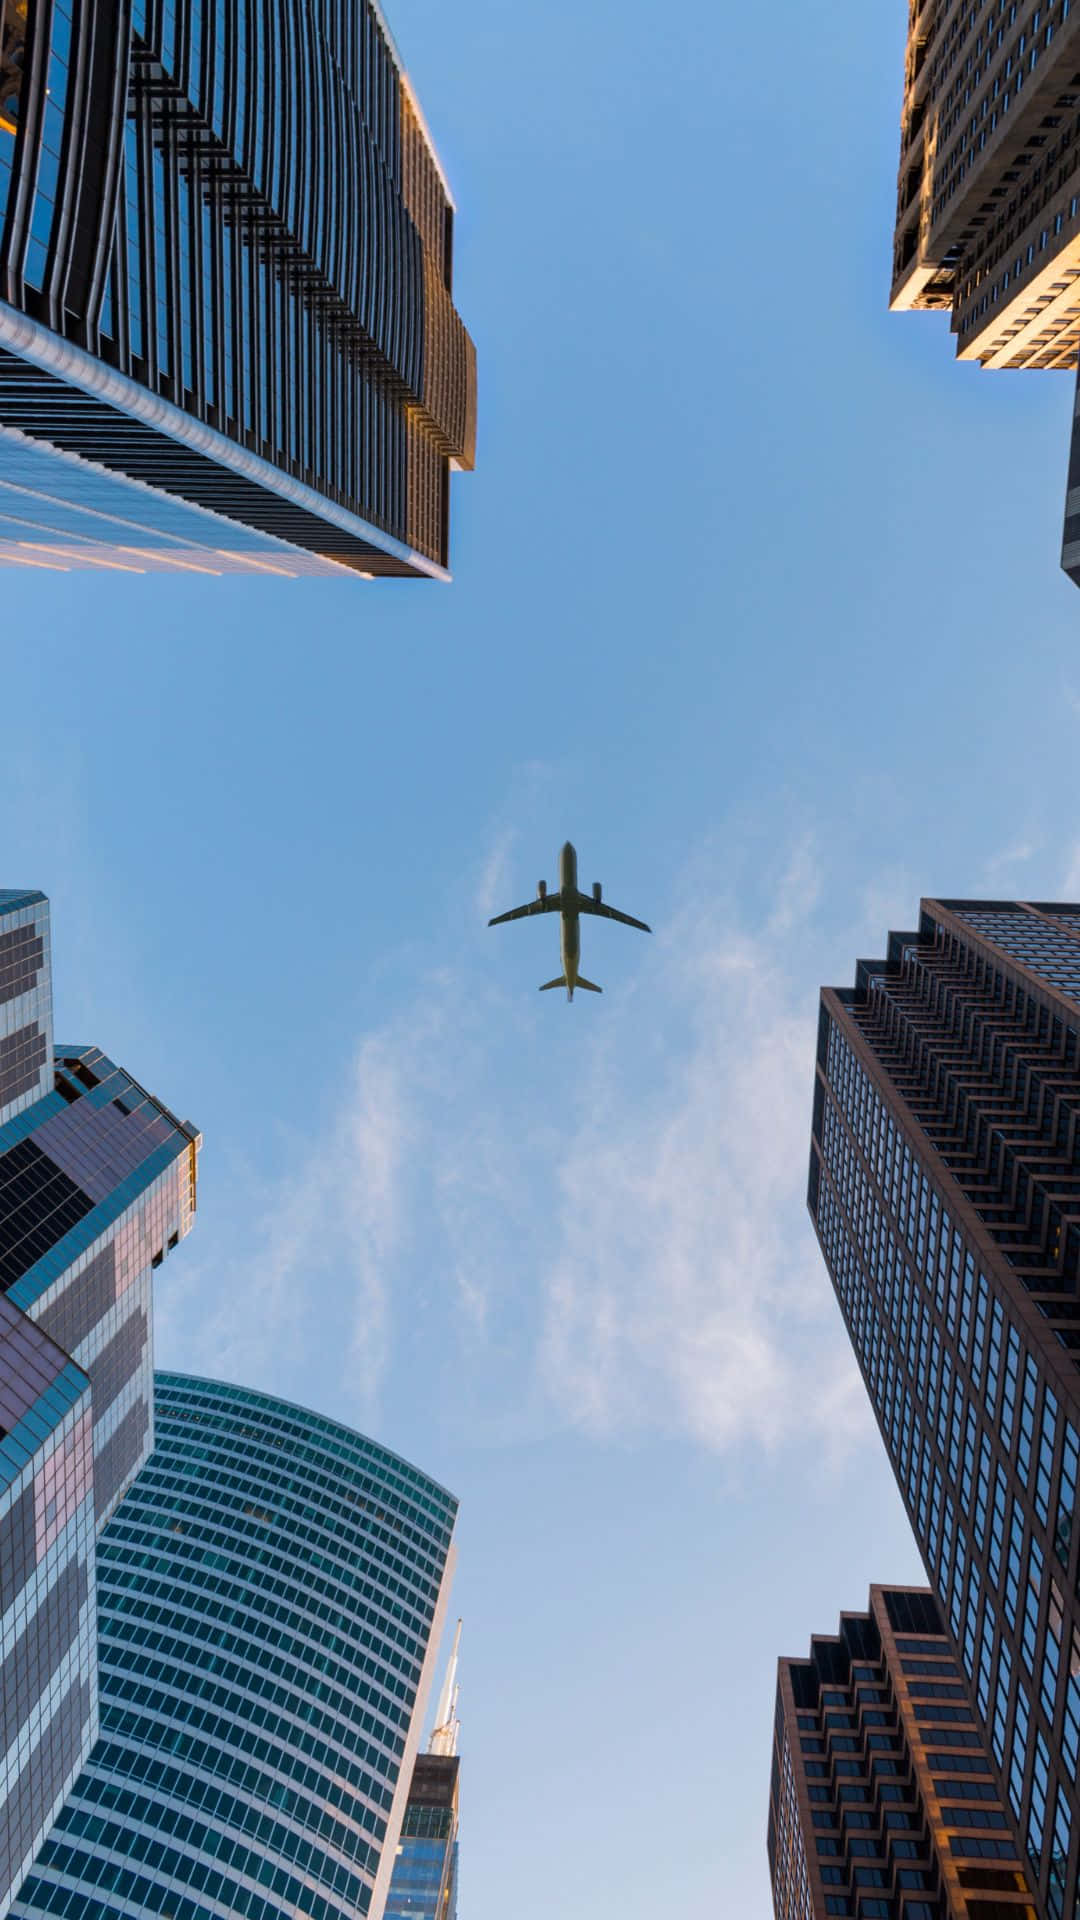 Airplane In The City Portrait Background